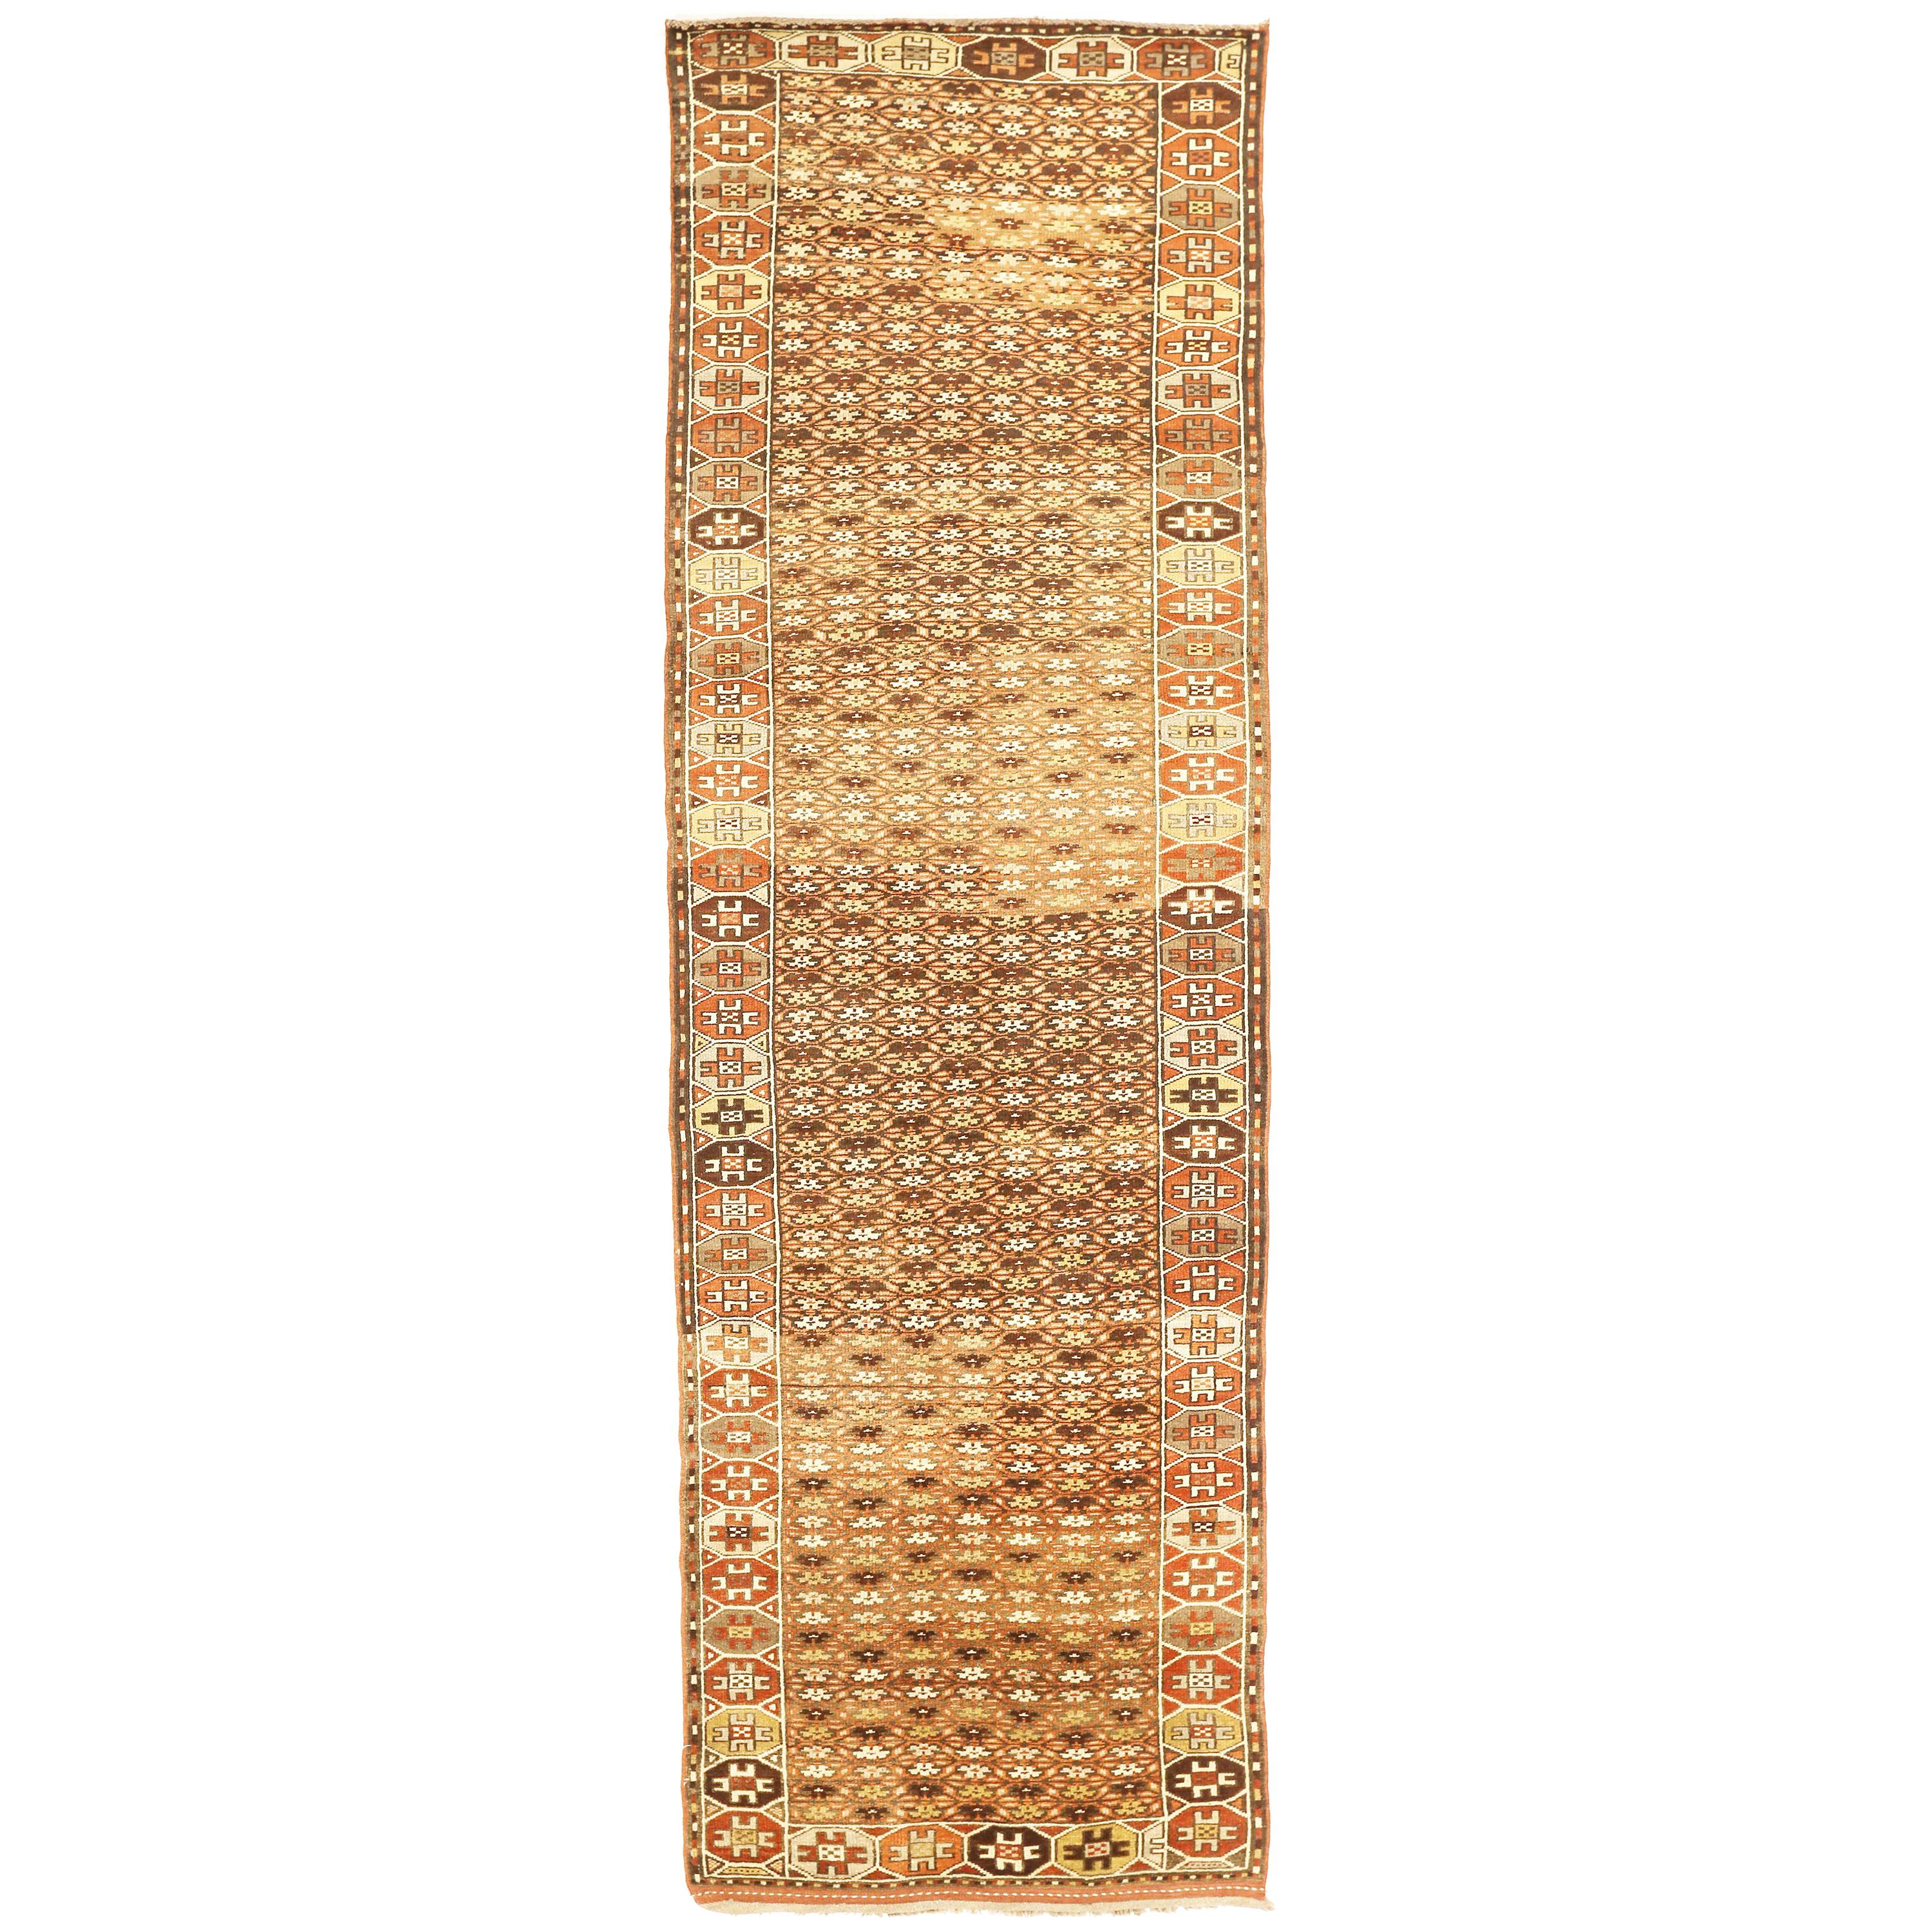 Antique Azerbaijan Rug with Brown and Ivory Floral Details on Centerfield For Sale